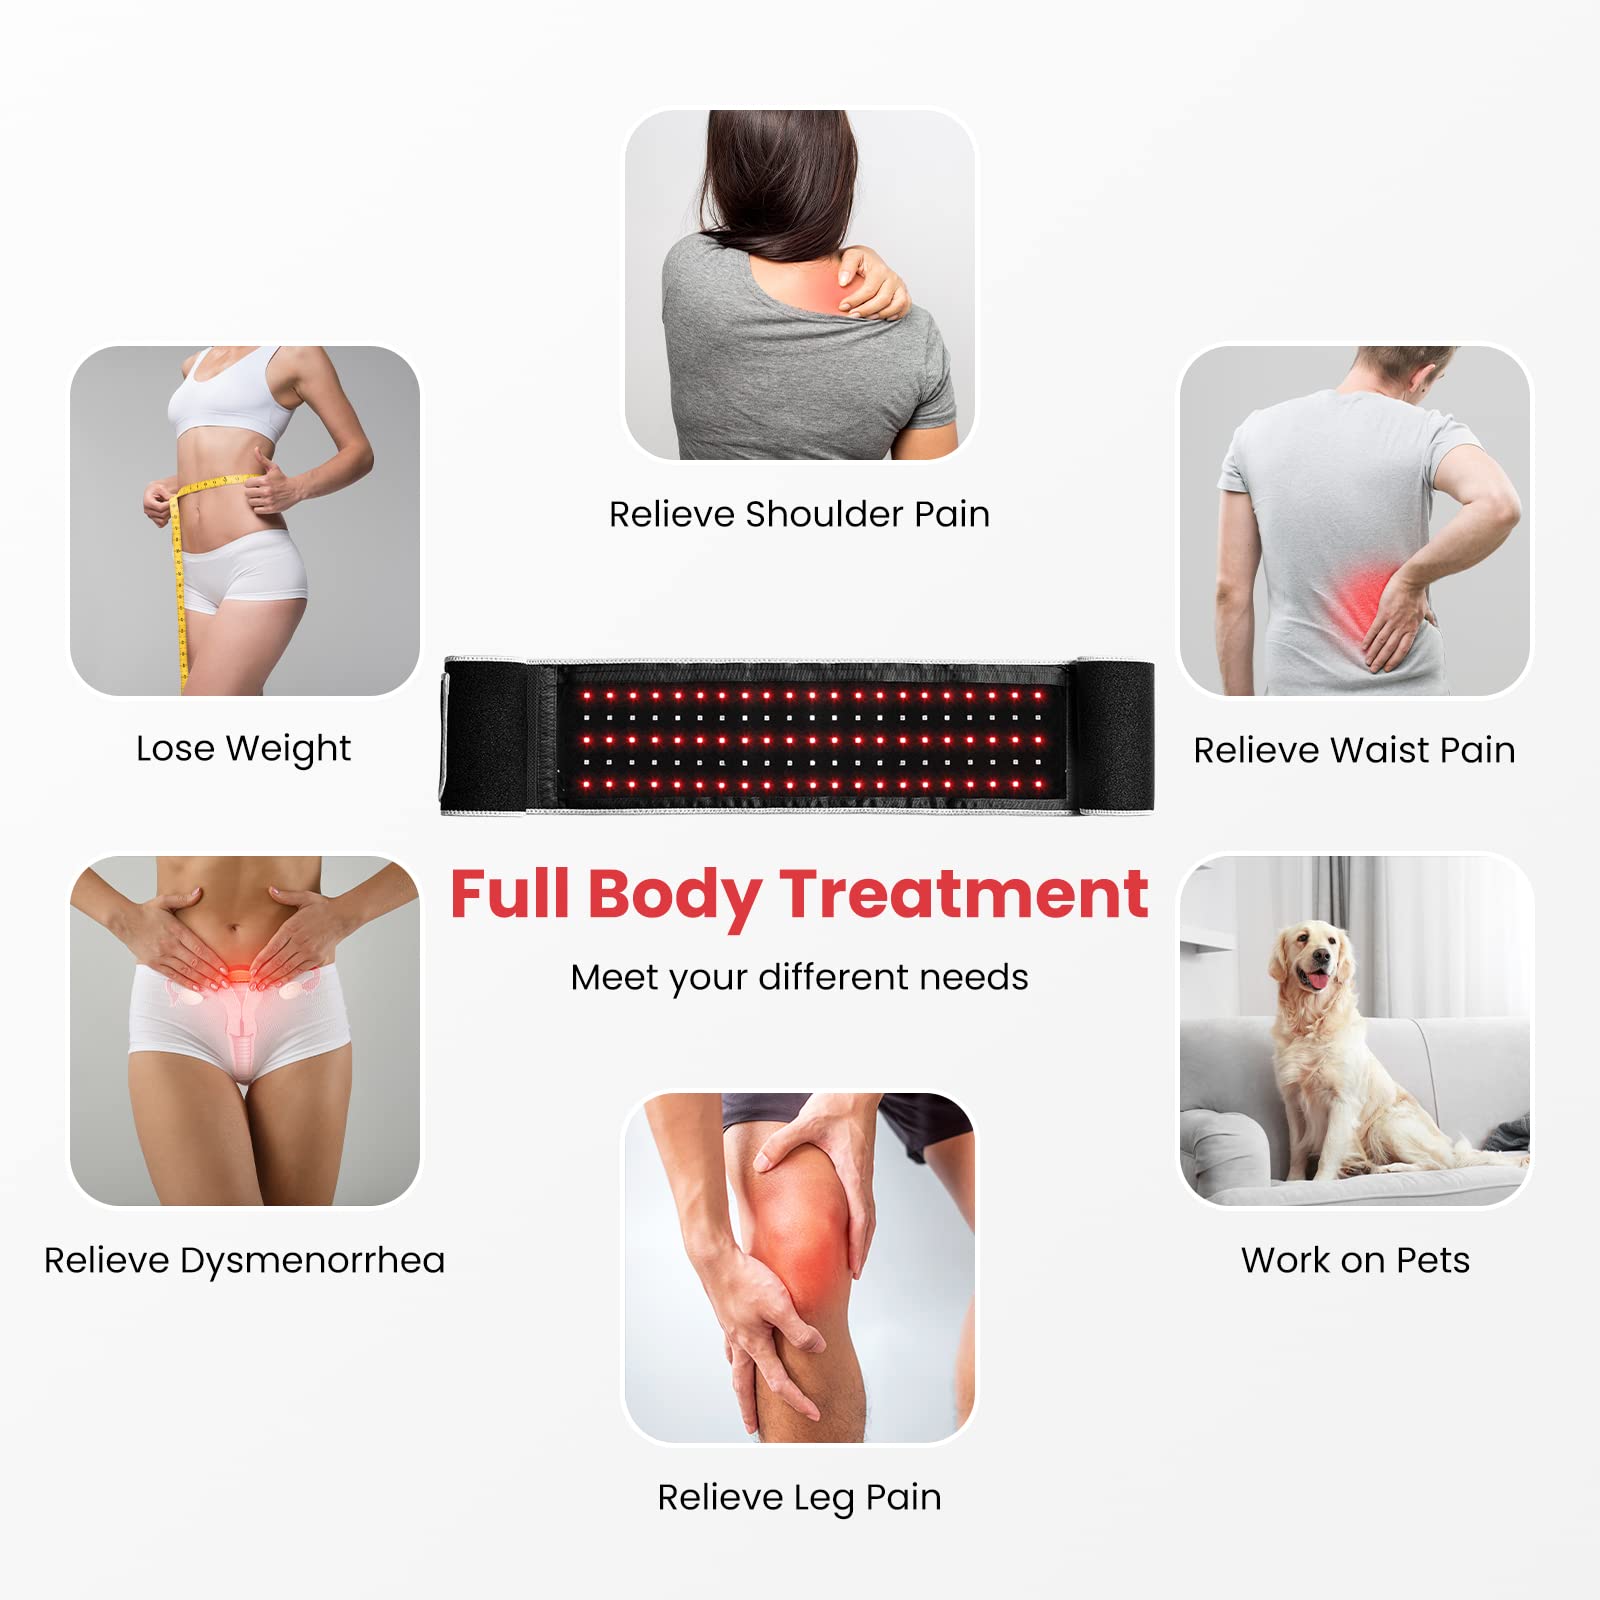 Opove Red Light Therapy Belt Near-Infrared Light Therapy for Tissue Repair, Resolve Inflammation, Relieve Joint & Back Pain, Wearable Flexible Portable Lipo Wrap for Body, 660nm & 850nm Wavelengths,R1